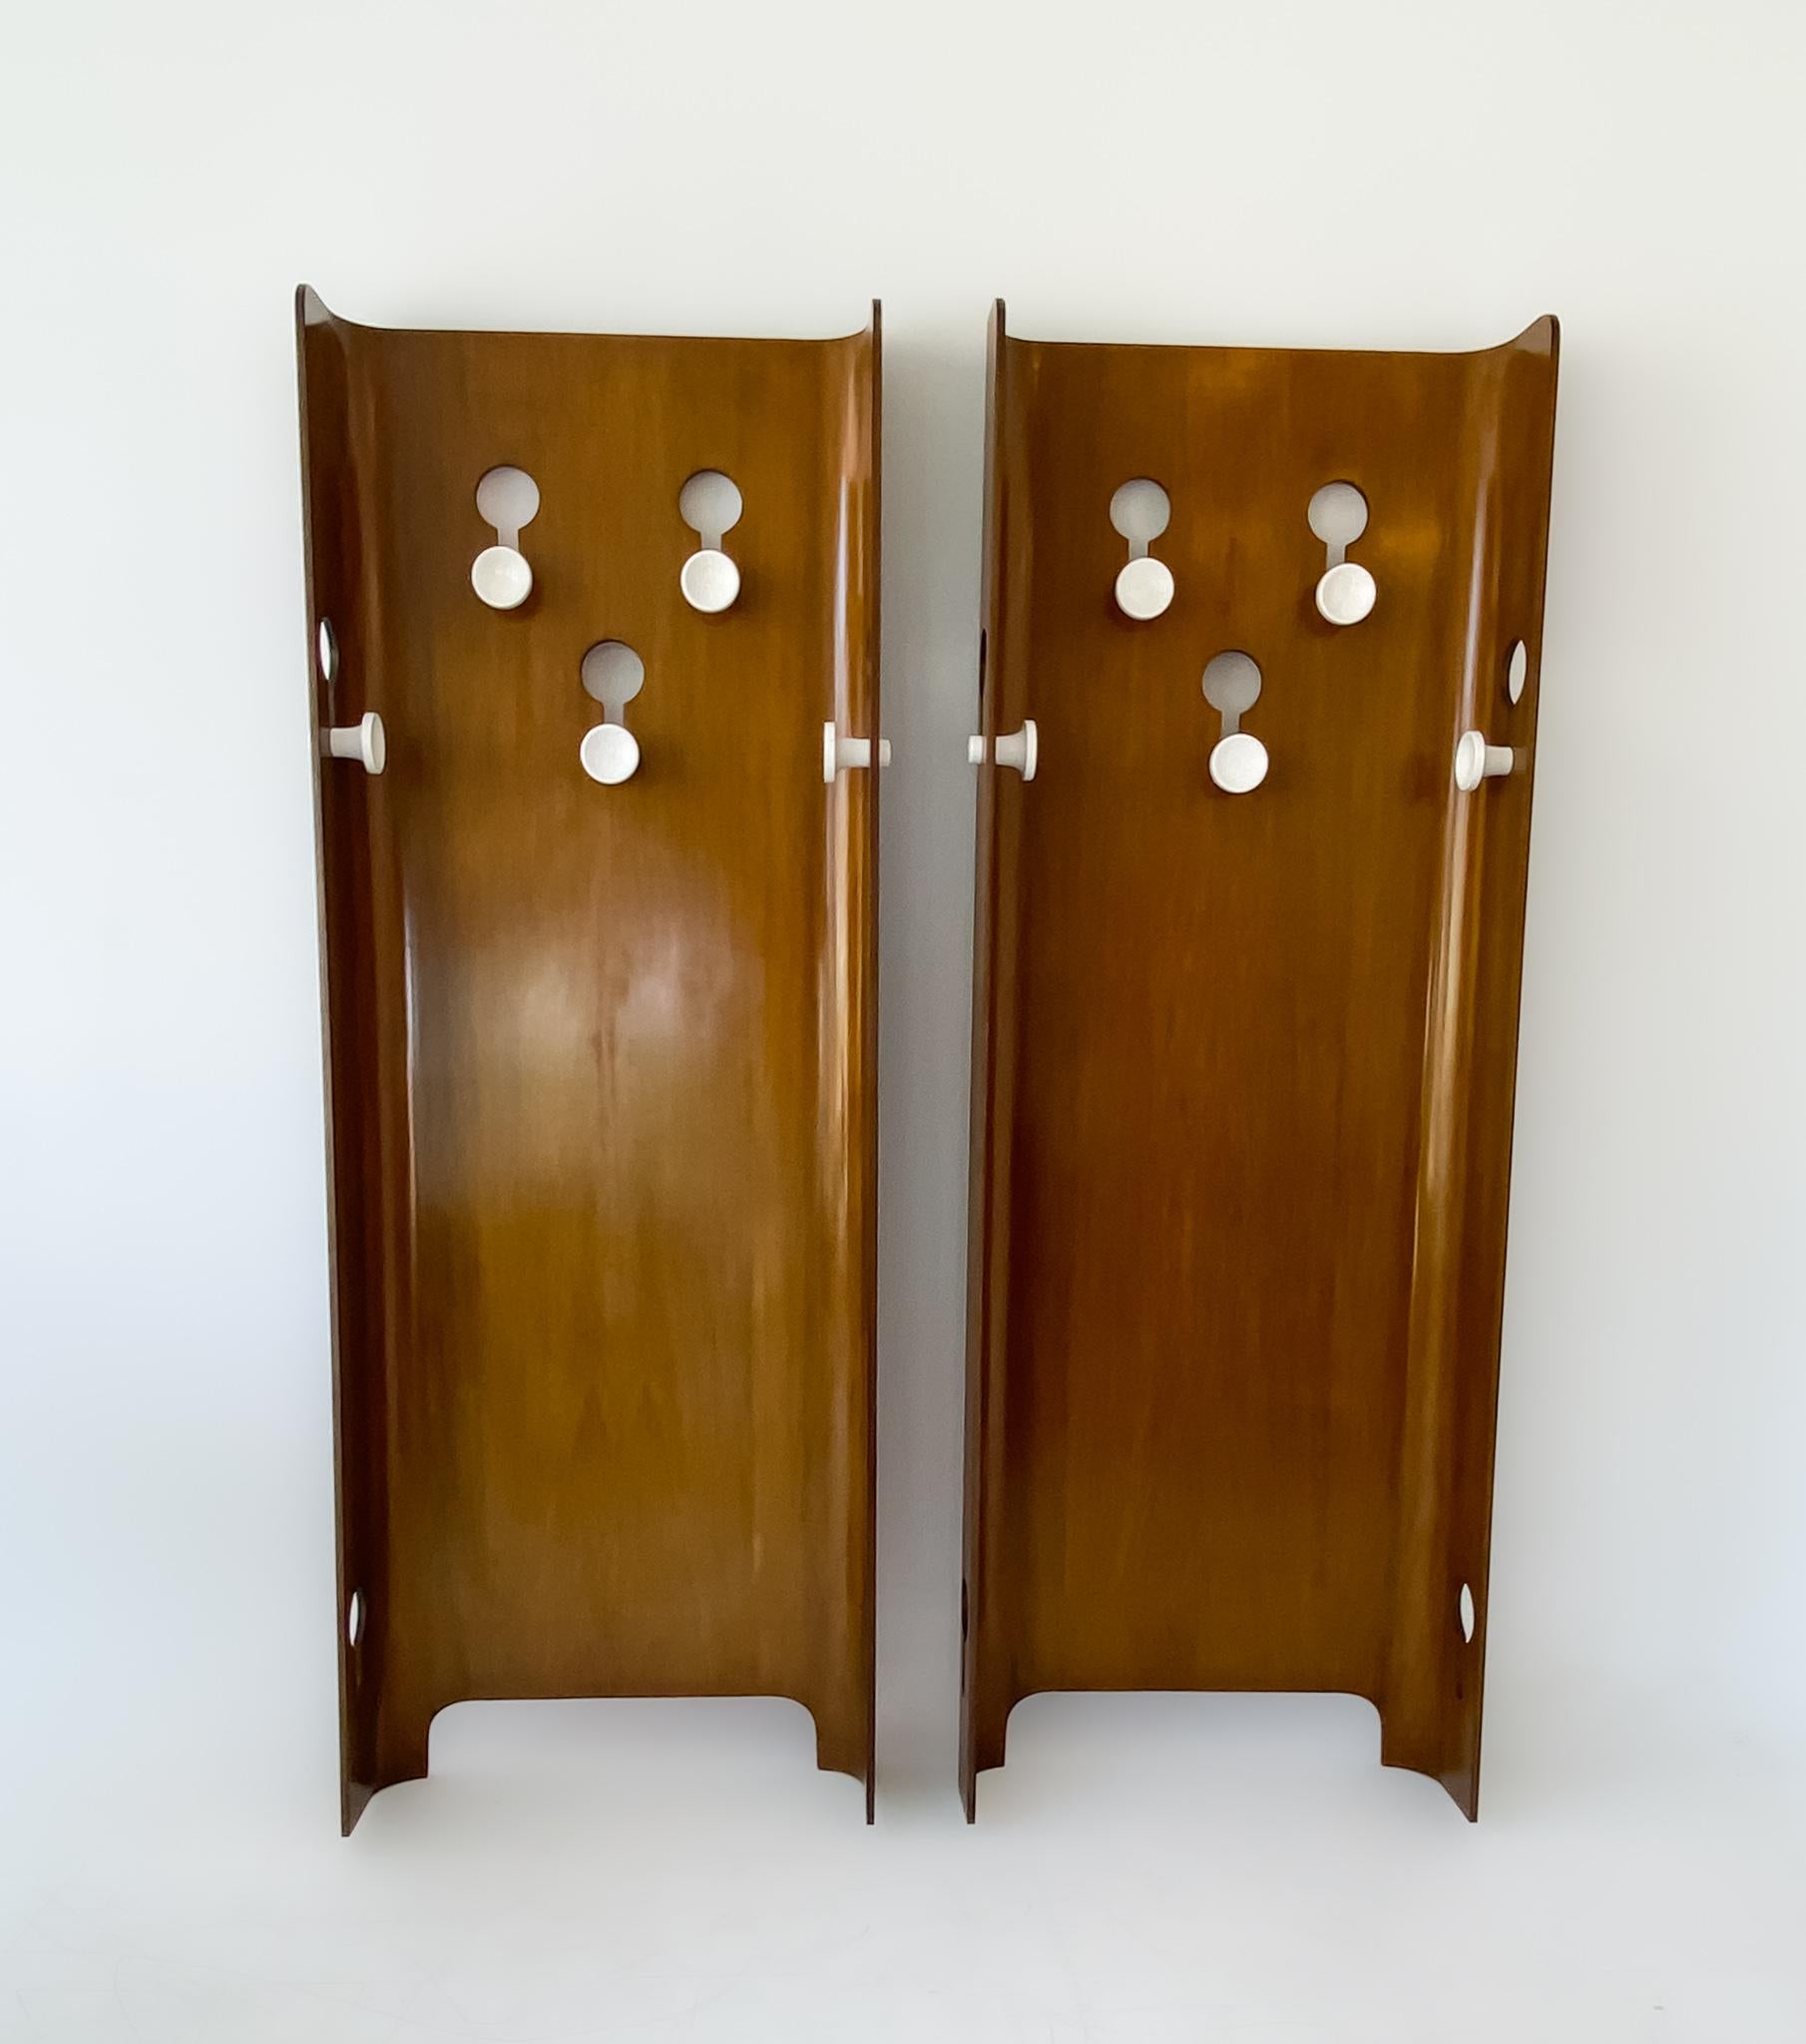 Pair of Mid-Centery Modern coat hangers by Carlo de Carli for Fiarm, Italy 1960s.

This pair of modular coat hangers was designed by Italian designer Carlo De Carli and produced by FIARM Scorzè in Italy in the 1960s. Made of curved plywood with